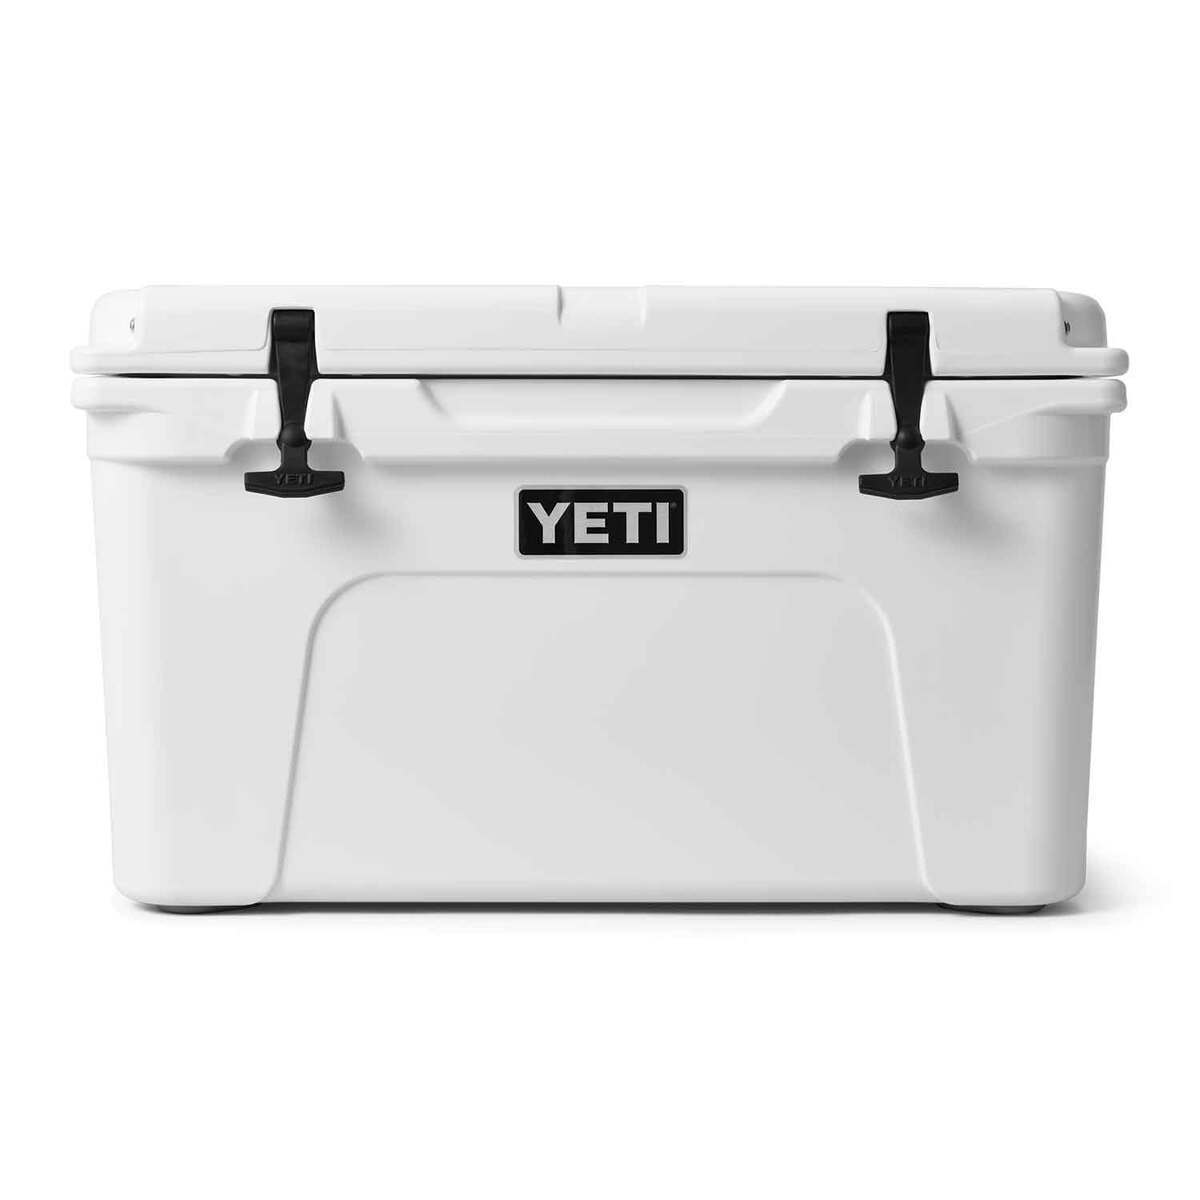 Yeti TUNDRA 45 Series 10045310000 Hard Cooler, 28 Cans Co